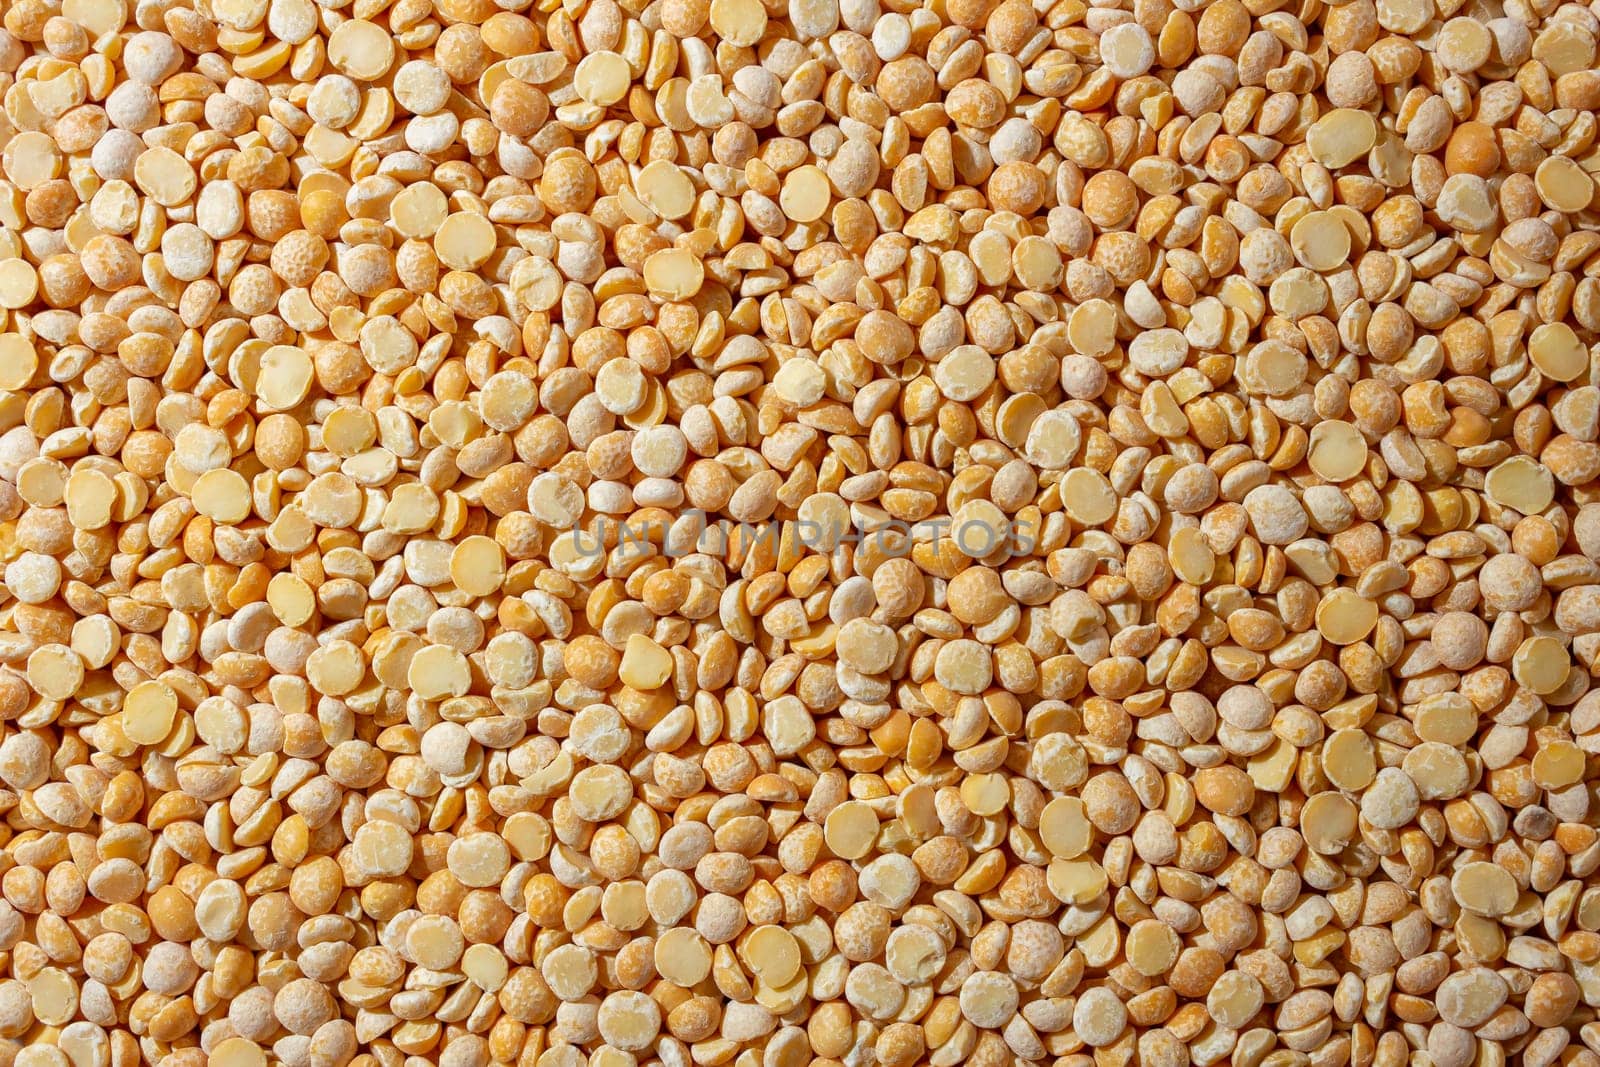 Uncooked Polished Split Peas Background. A Culinary Canvas of Dry Yellow Peas, Creating a Lively and Textured Background for Gourmet Cooking. Scattered Raw Polished Peas. Healthy Eating Ingredients